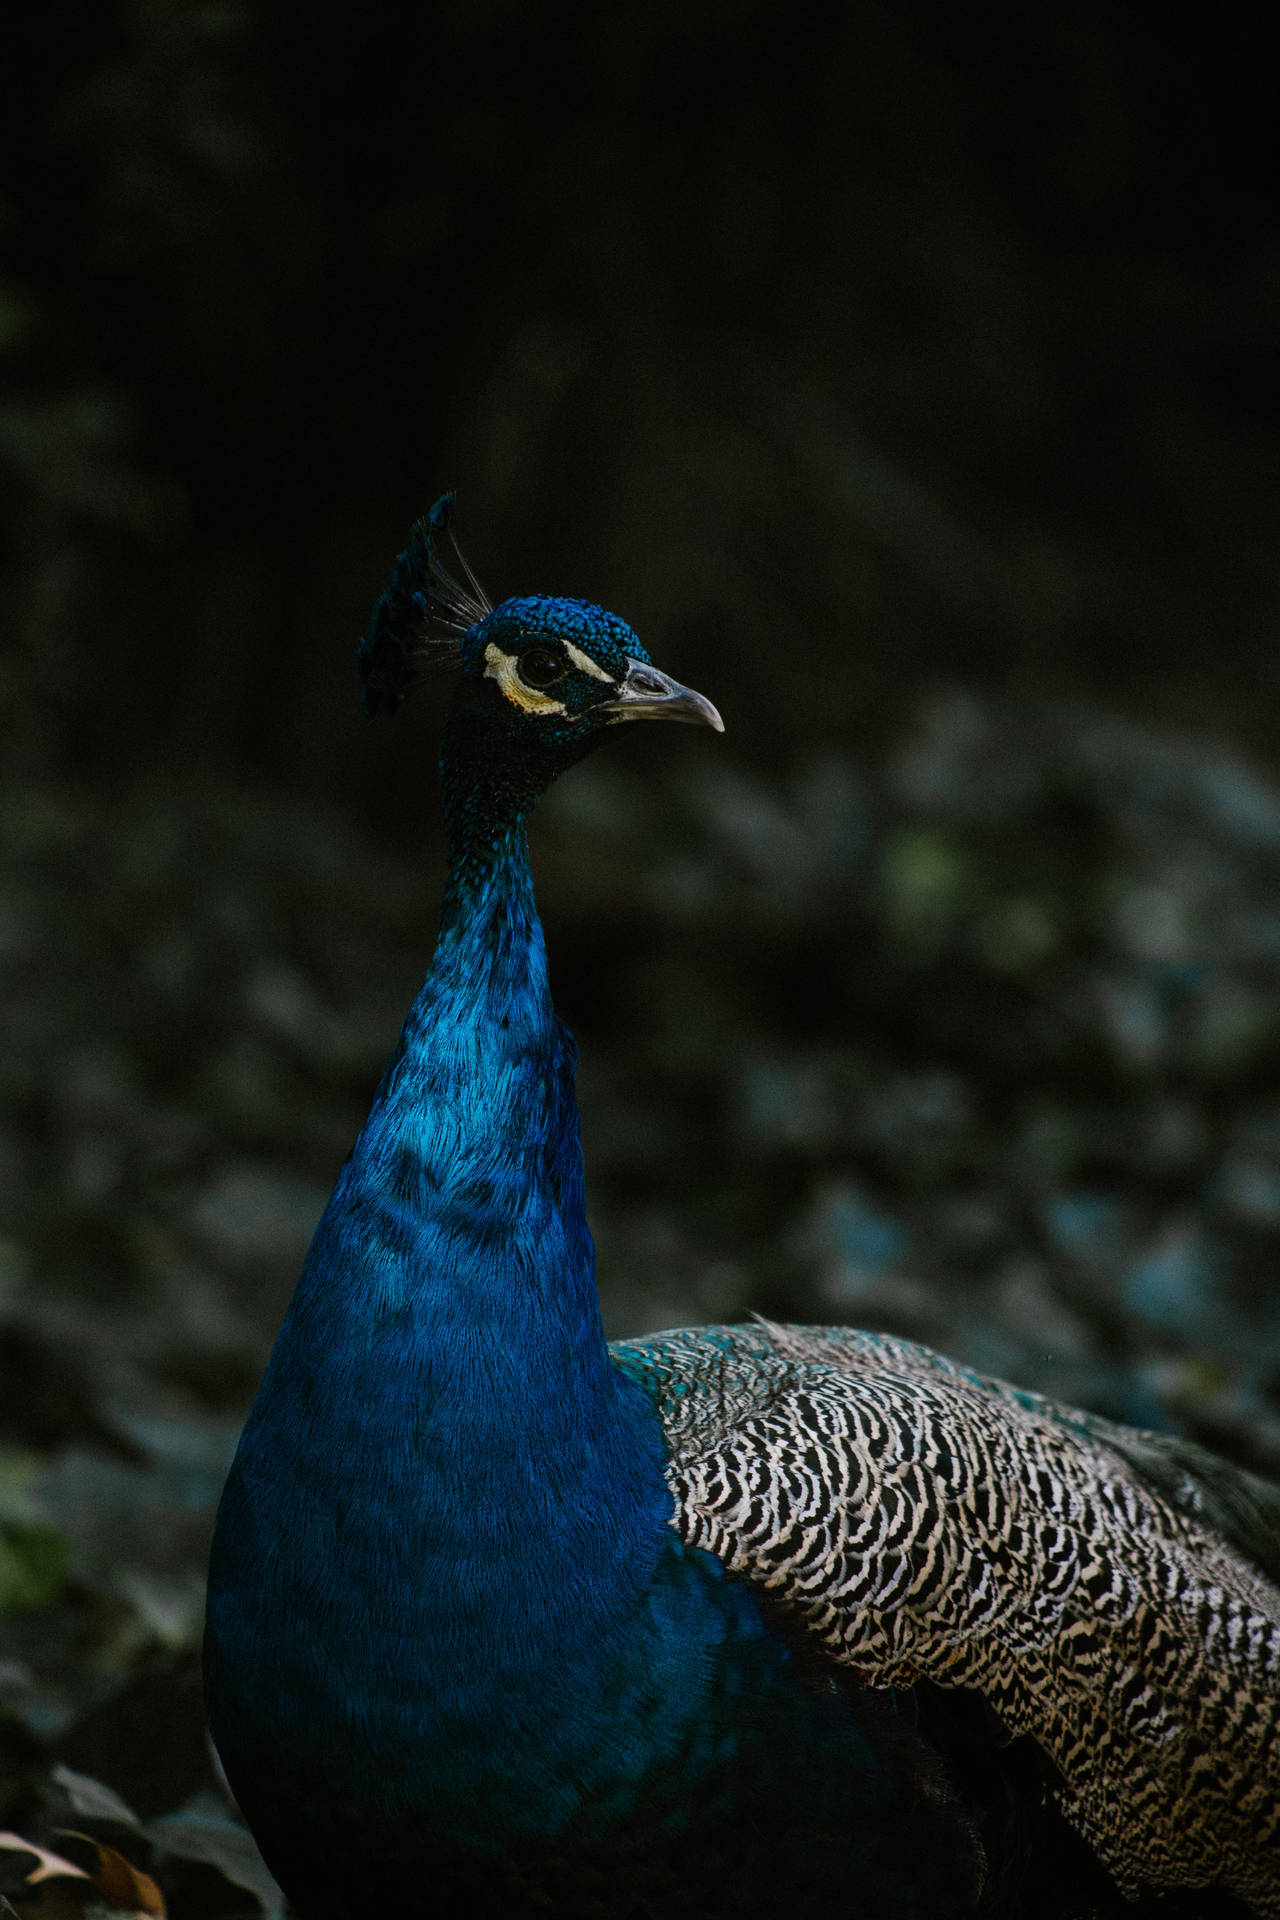 Peacock 3139X4708 Wallpaper and Background Image